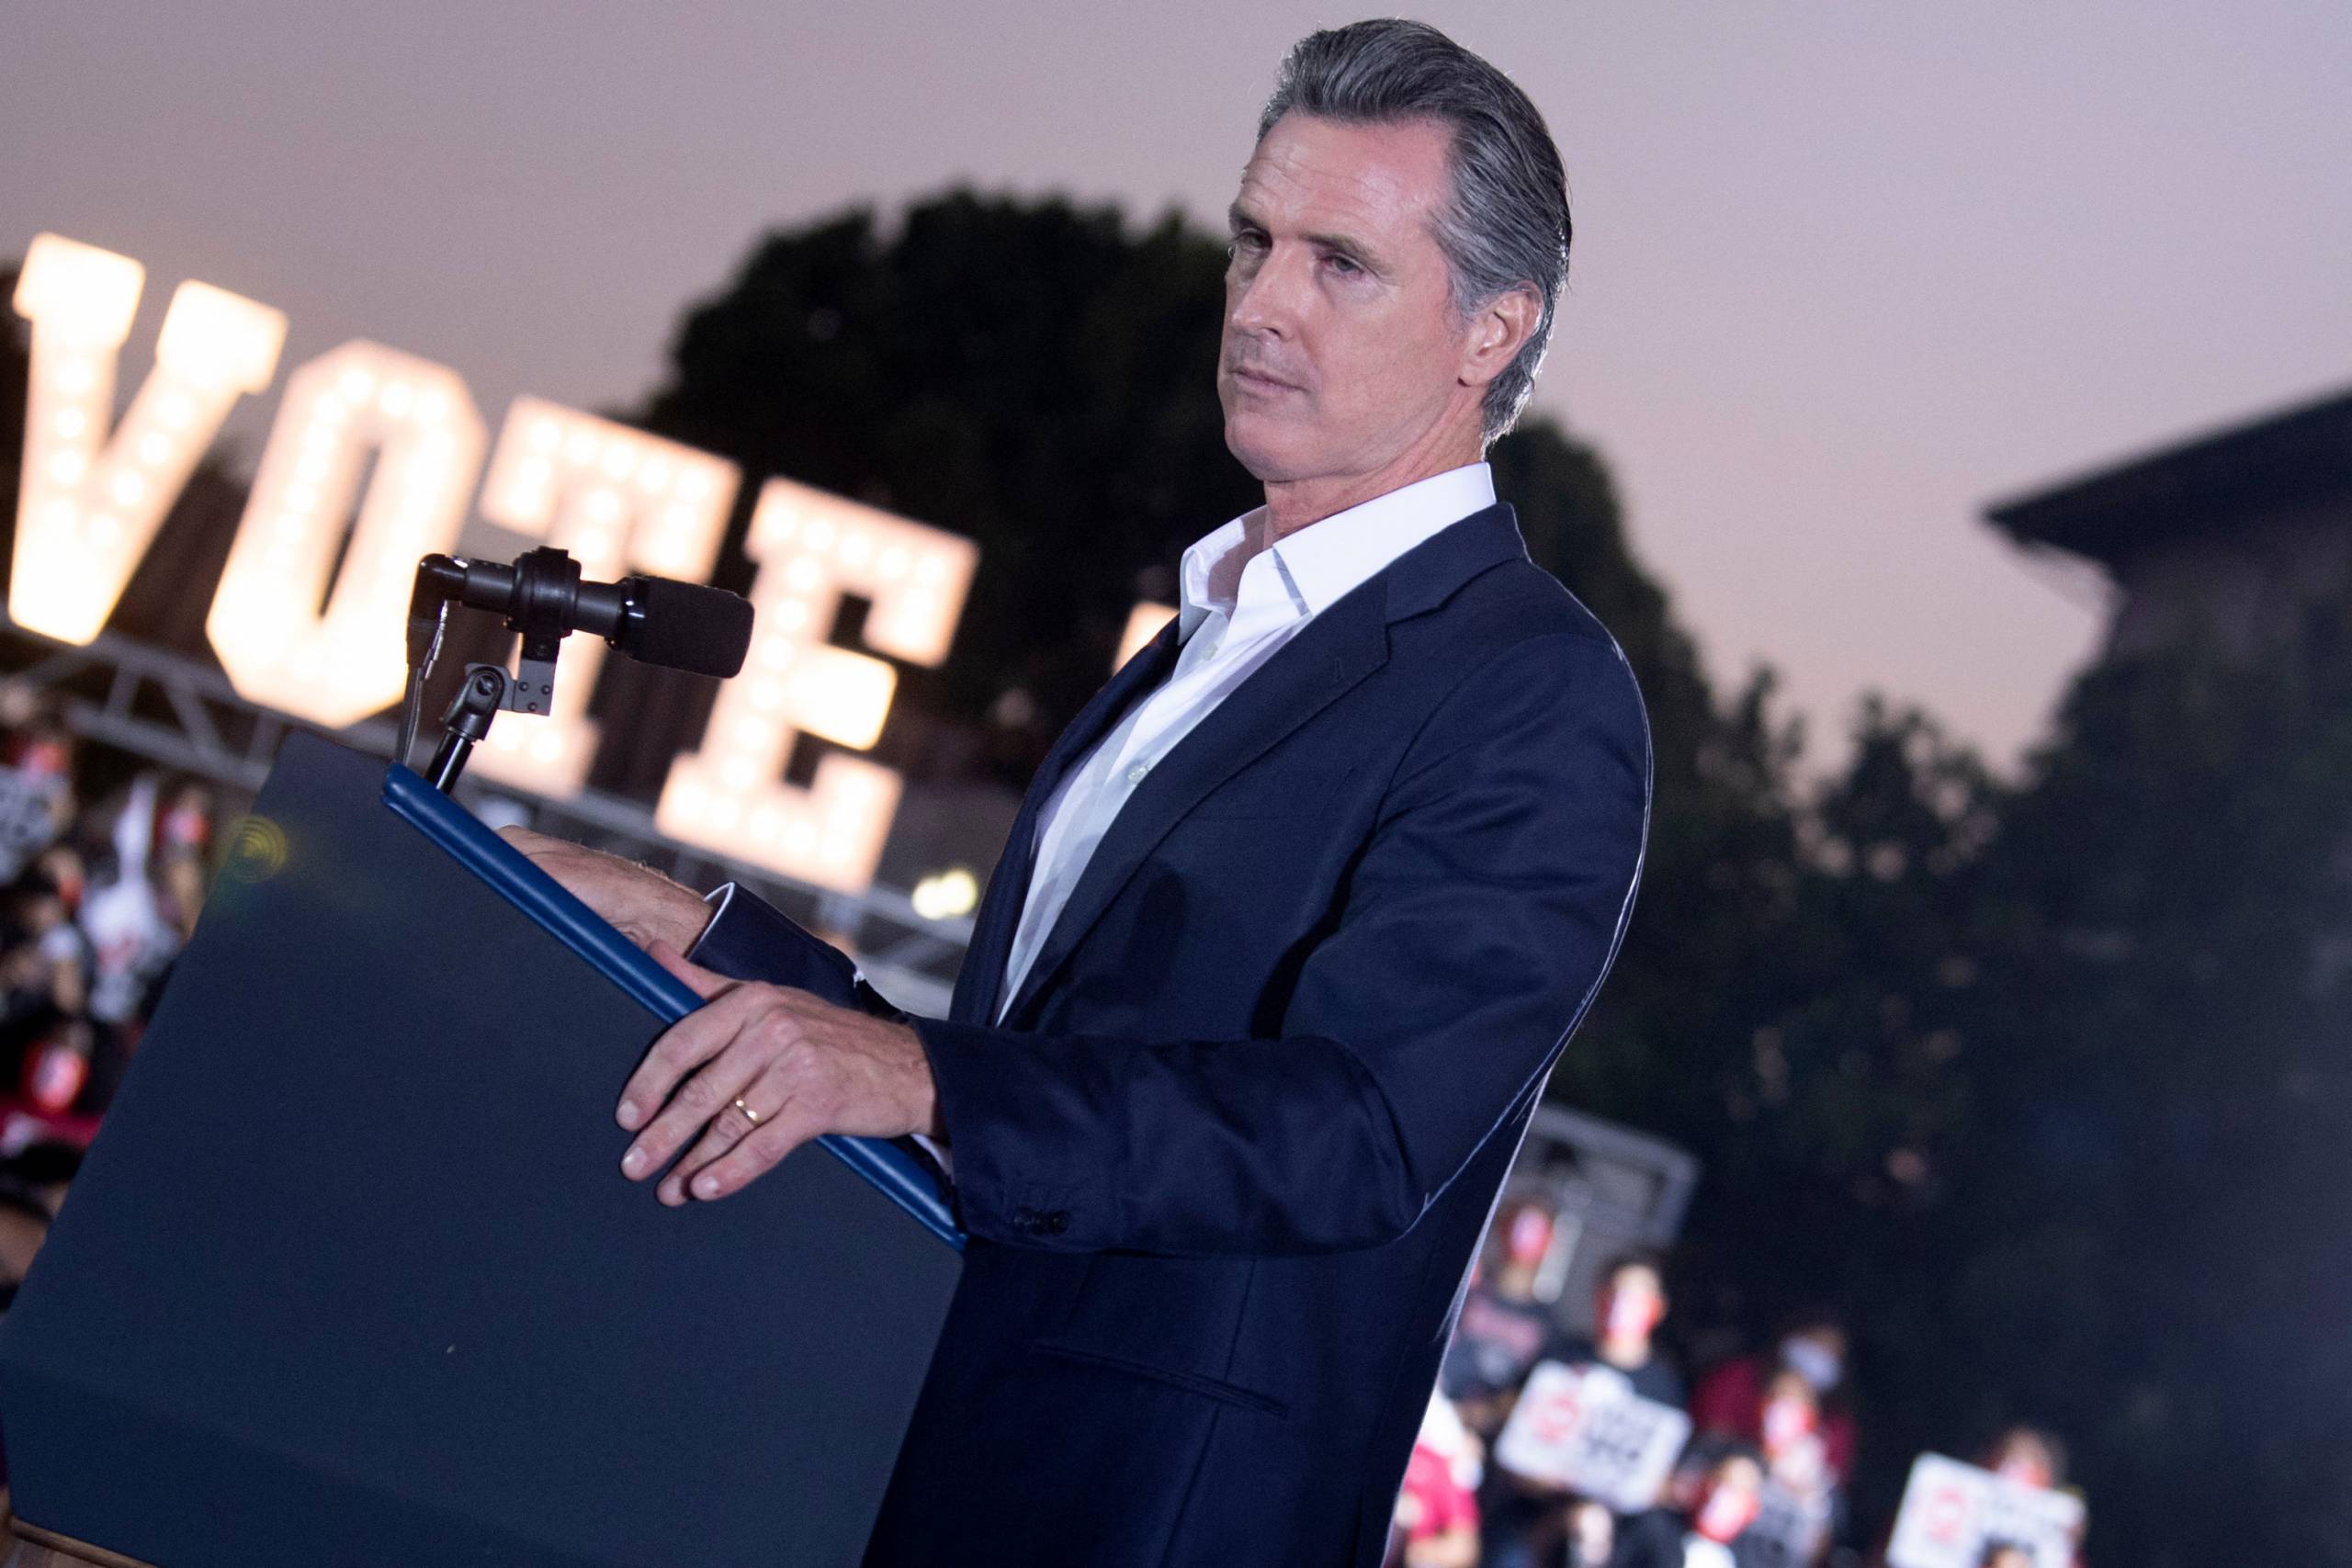 Gov. Gavin Newsom stands at a podium with a stern look, a large lighted sign beyond him that says, "Vote."